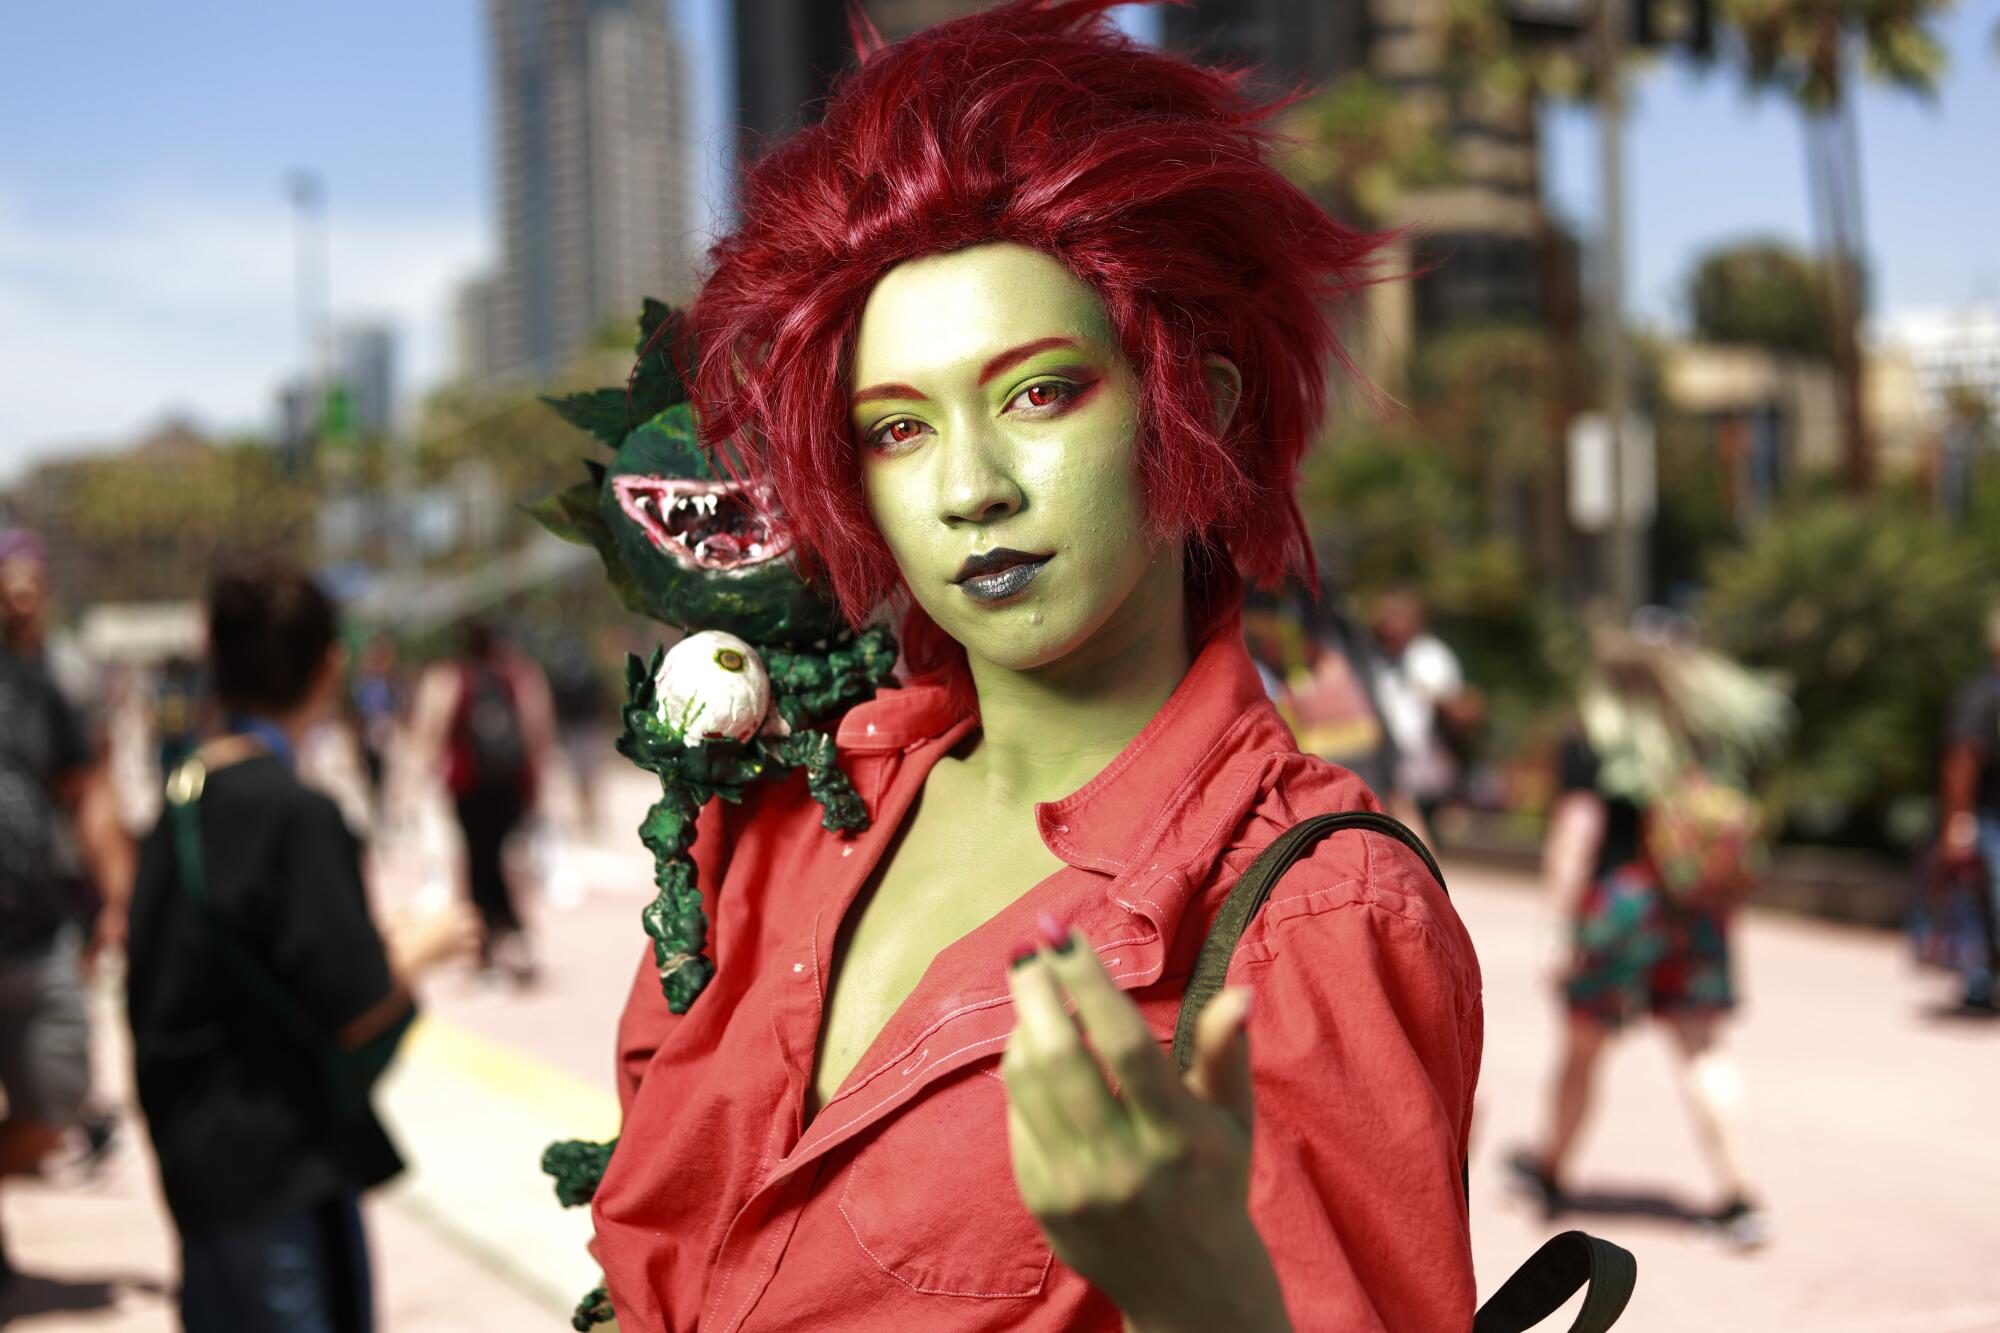 Leo Cotton of San Diego dressed as Poison Ivy at Comic-Con.